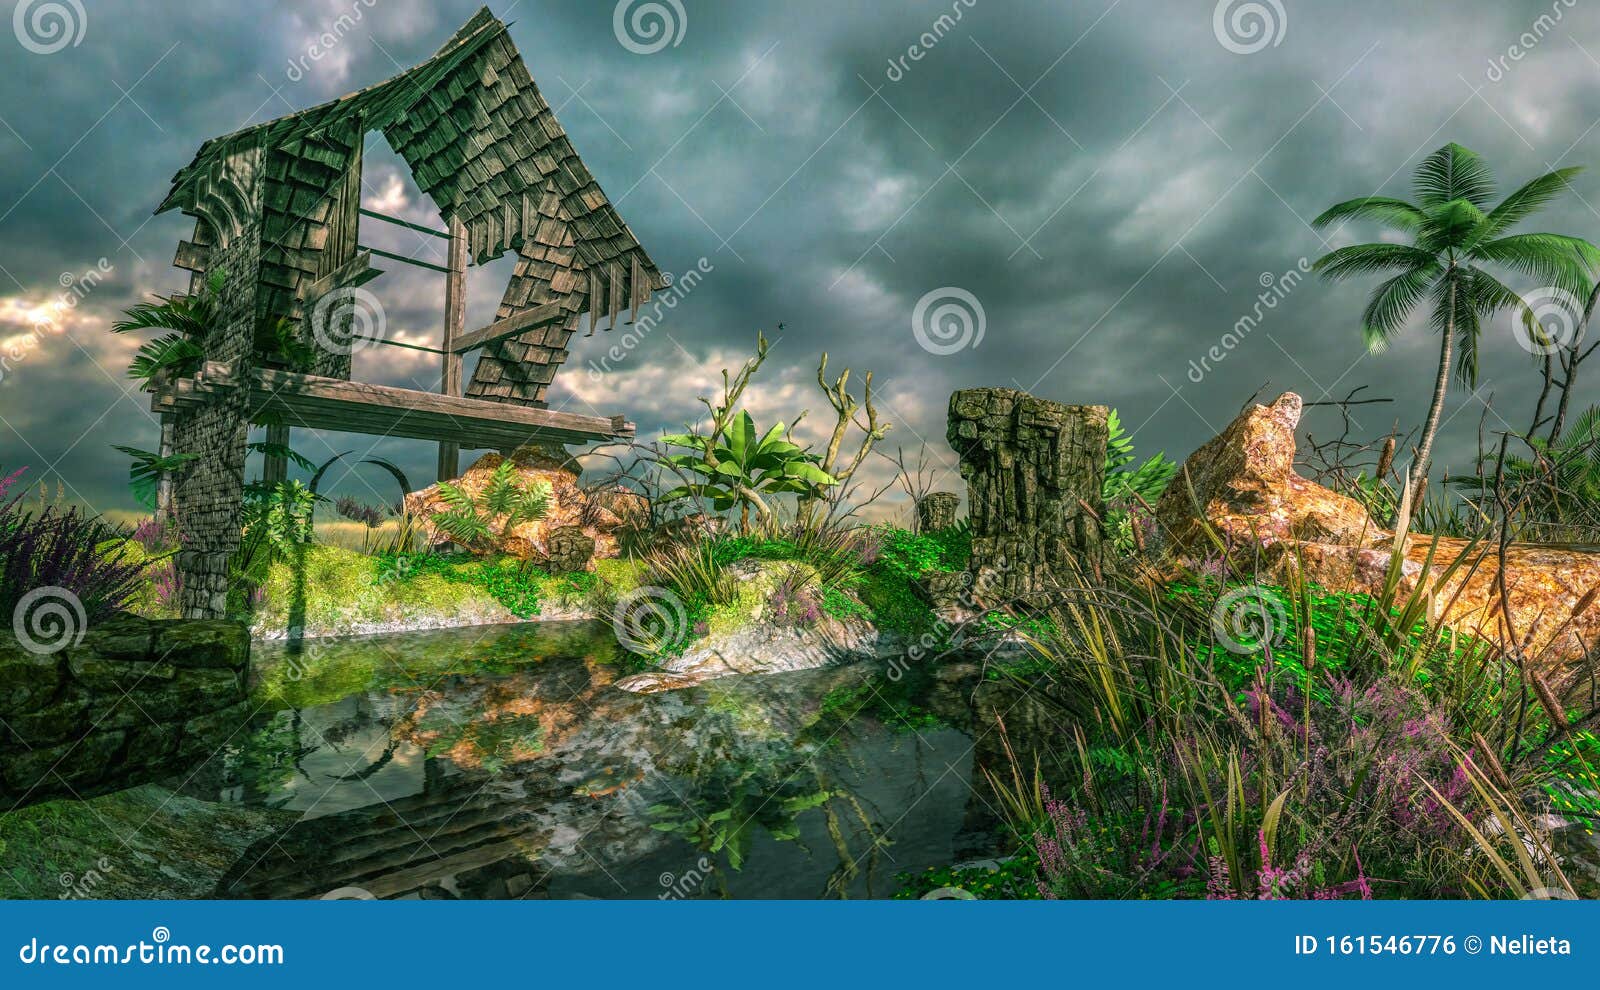 3D CG Ruins in Background Stock - of graphics, plants: 161546776